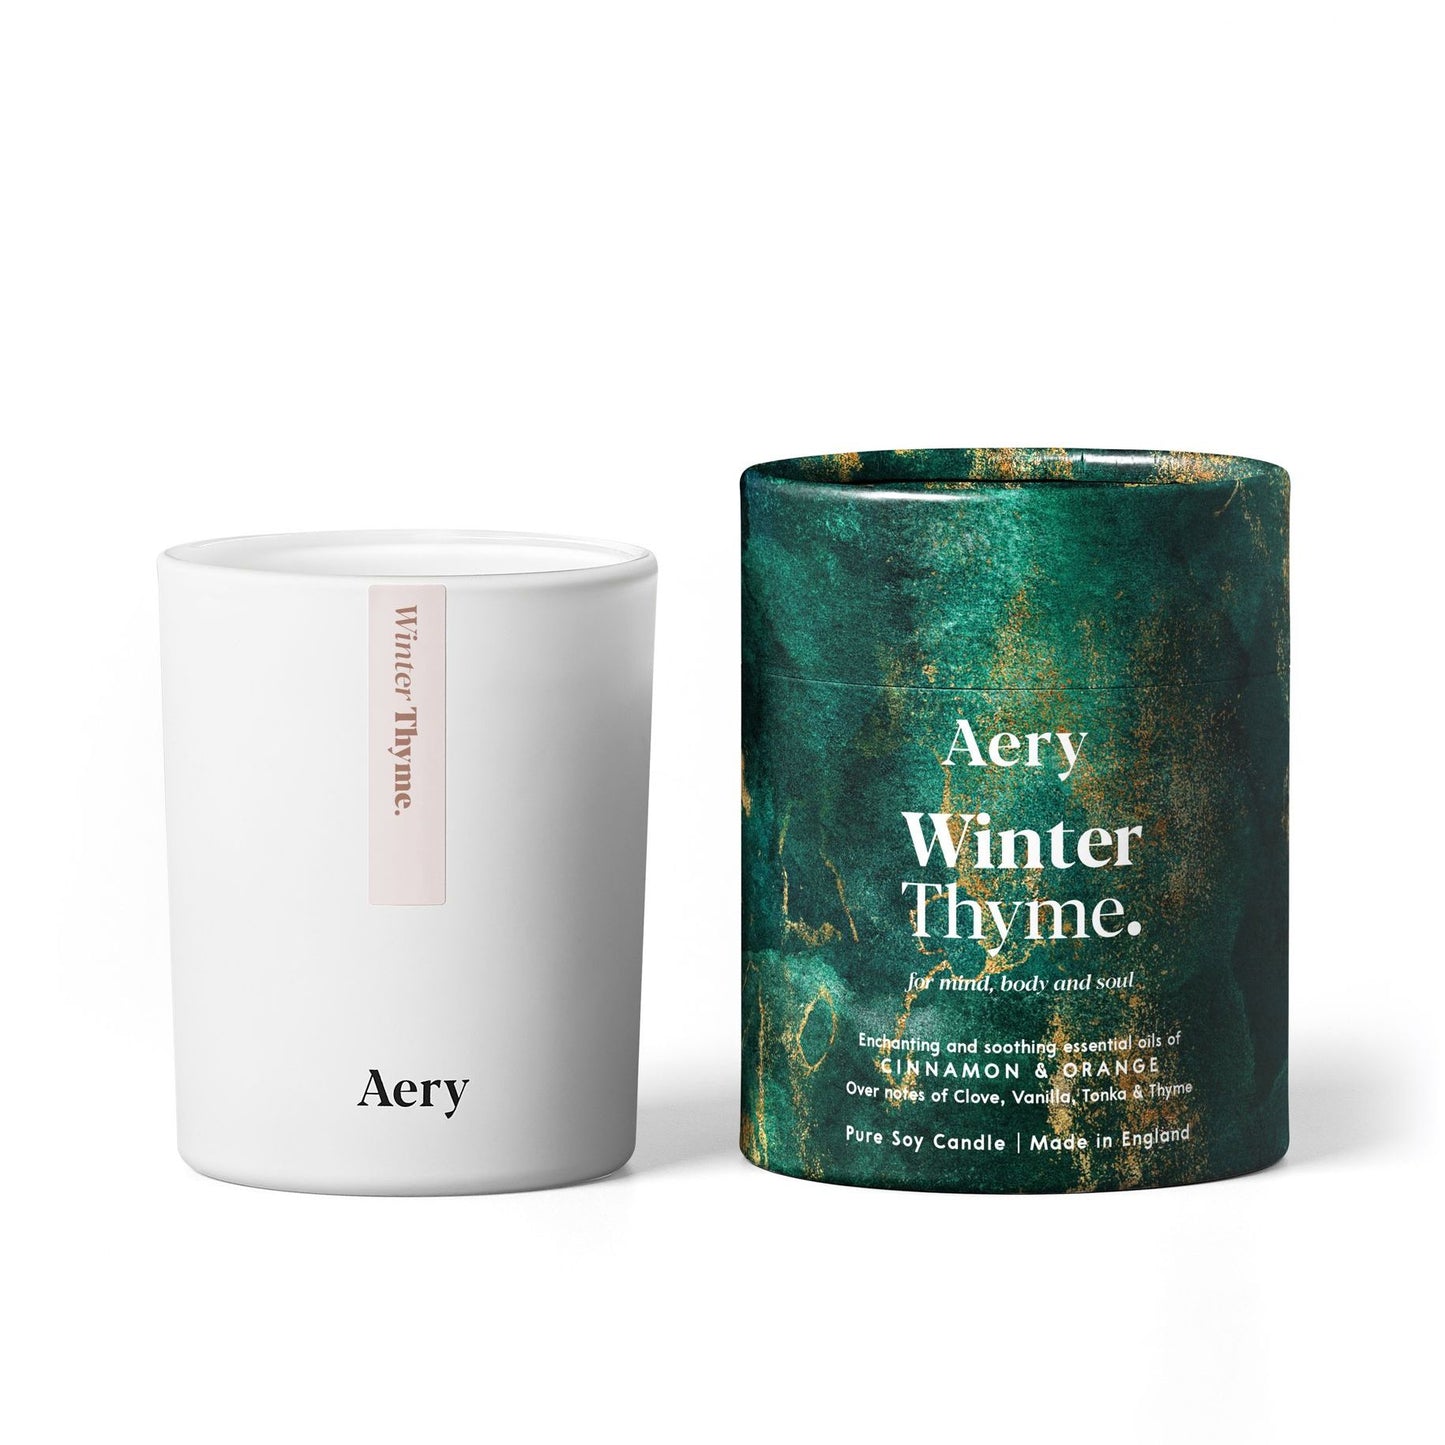 White Aery winter thyme candle with the green packaging card cylinder on the right.